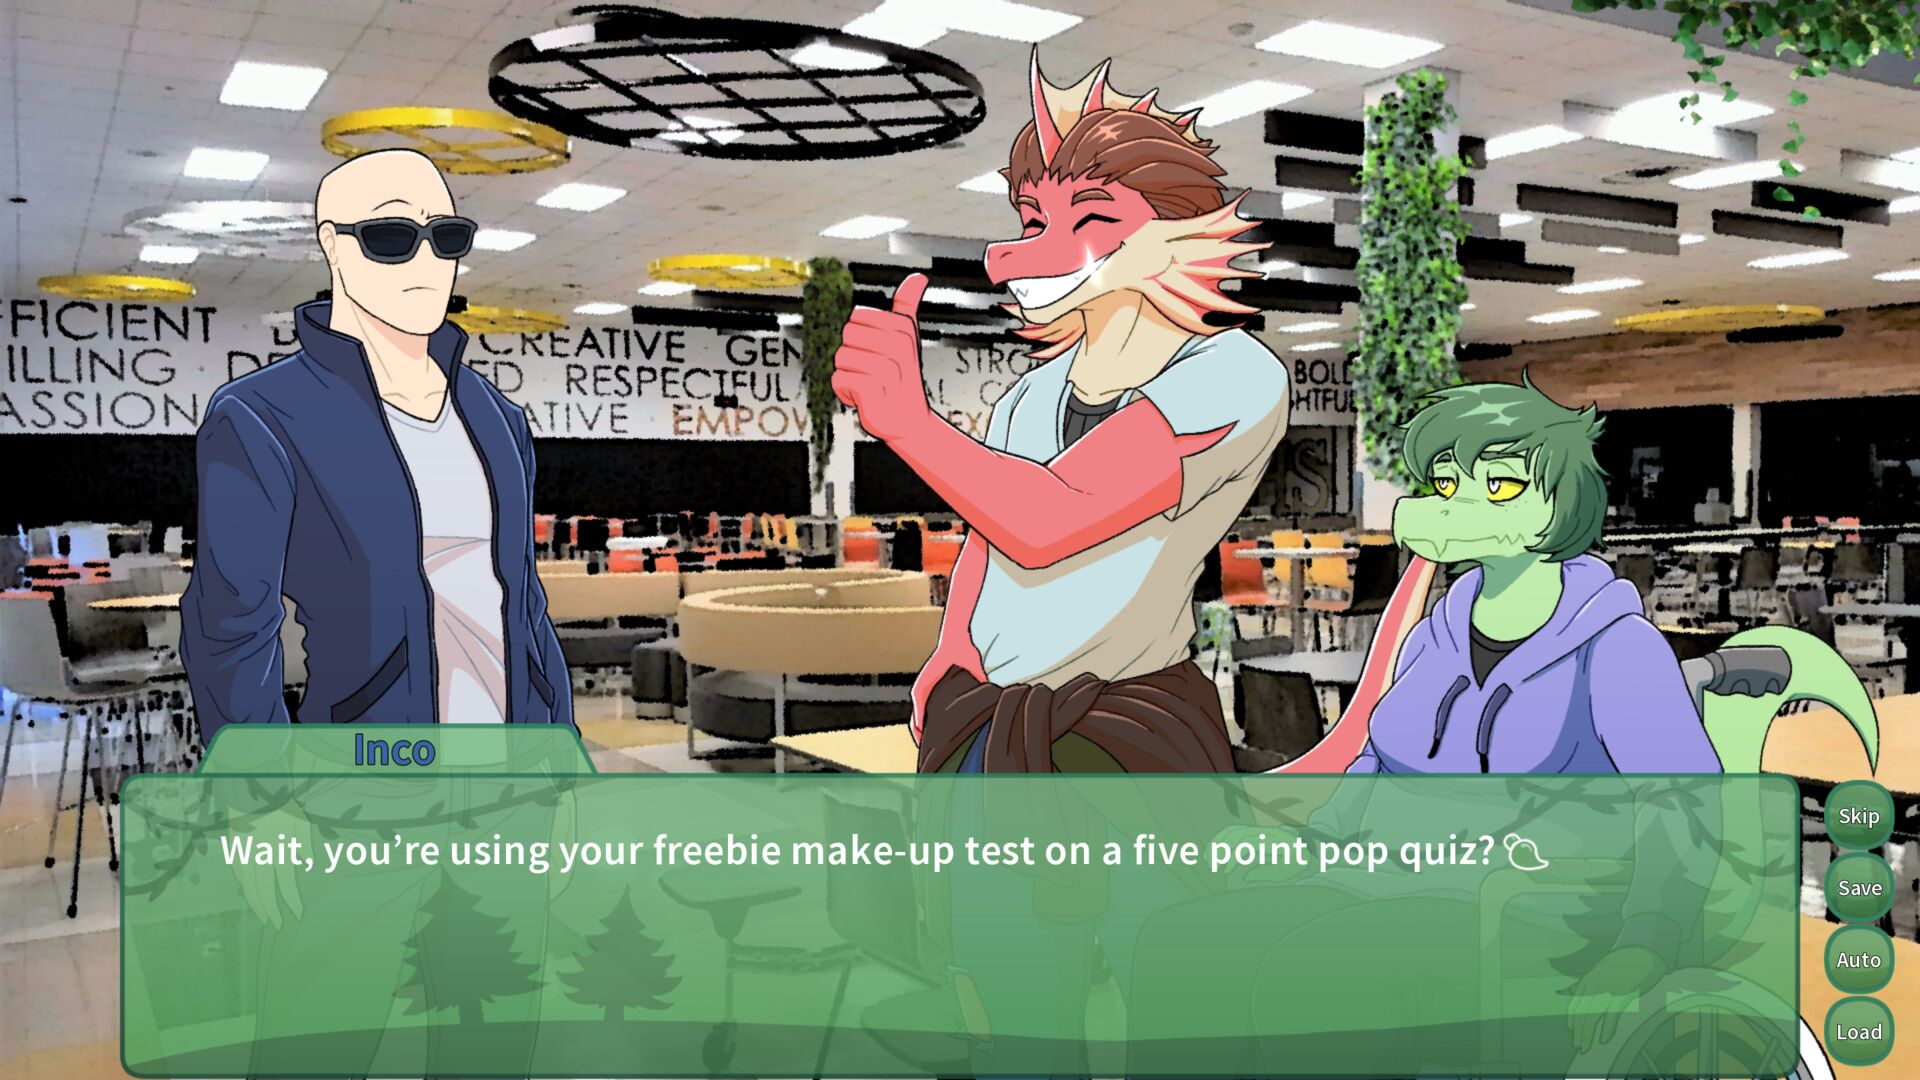 Screenshot 1: Inco, Damien and Olivia stand in the school cafeteria. Inco asks "Wait, you're using your freebie make-up test on a five point pop-quiz?"